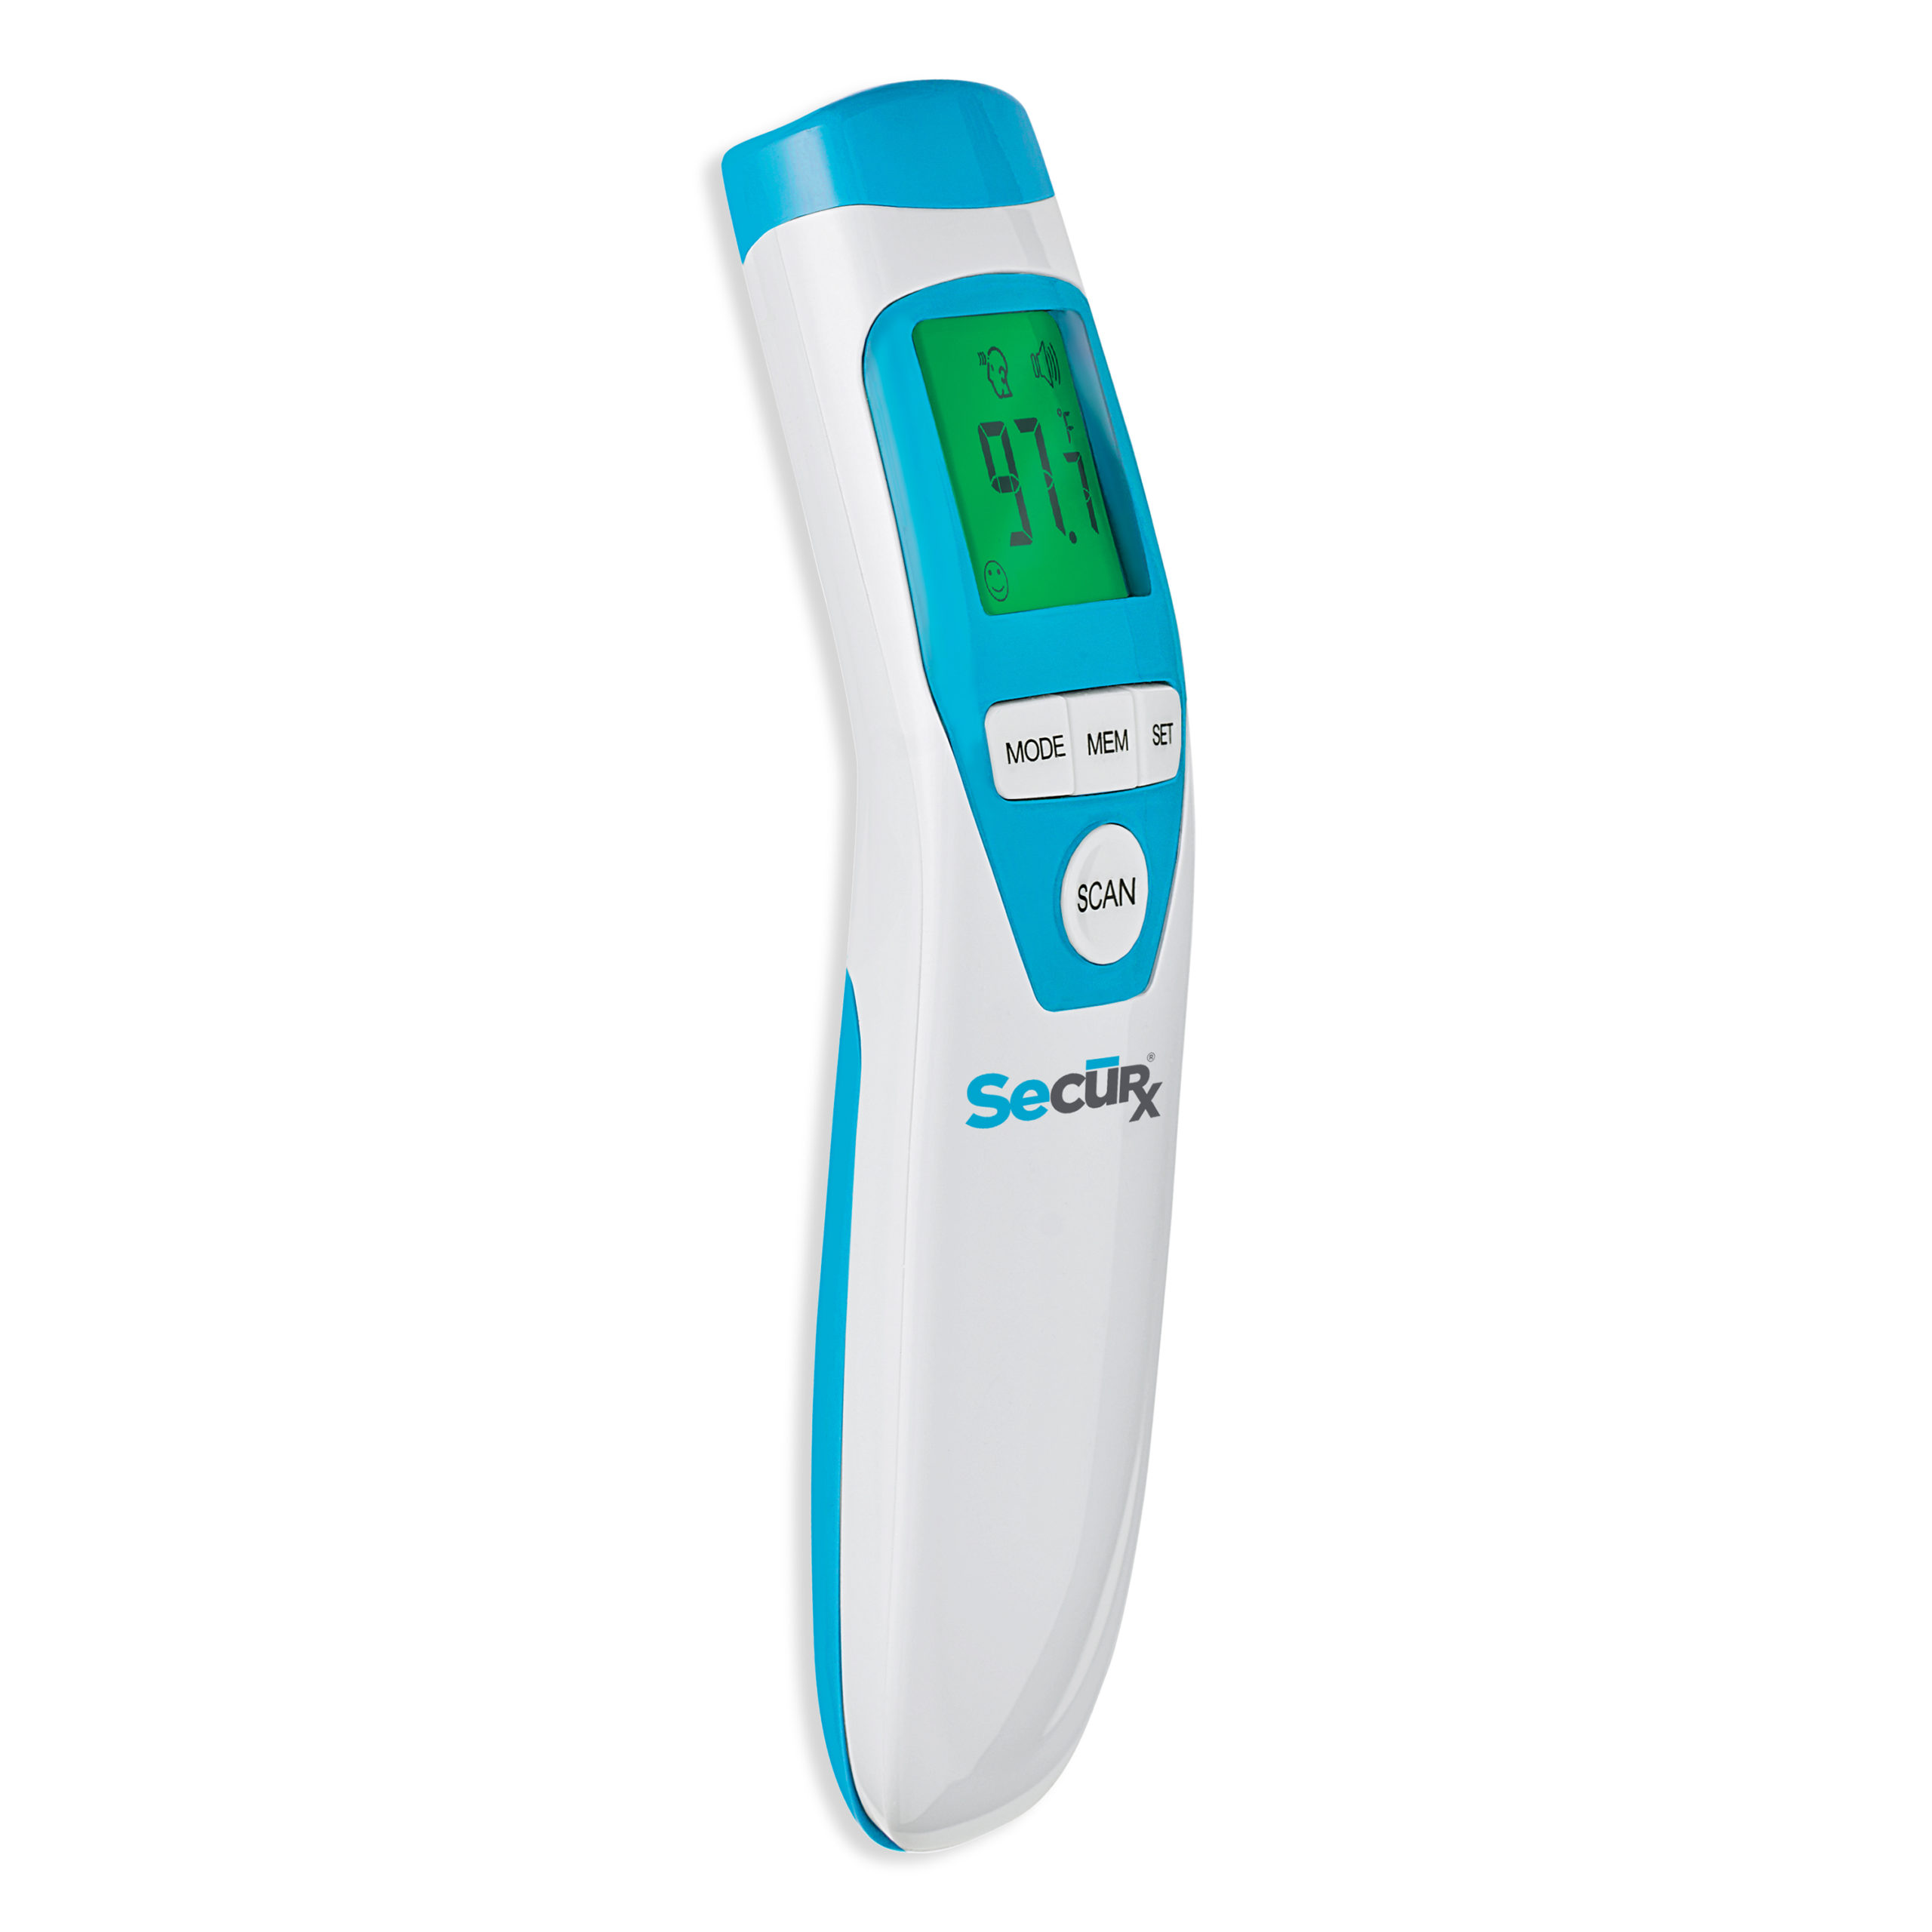 Infrared Thermometers for sale in Austin, Texas, Facebook Marketplace